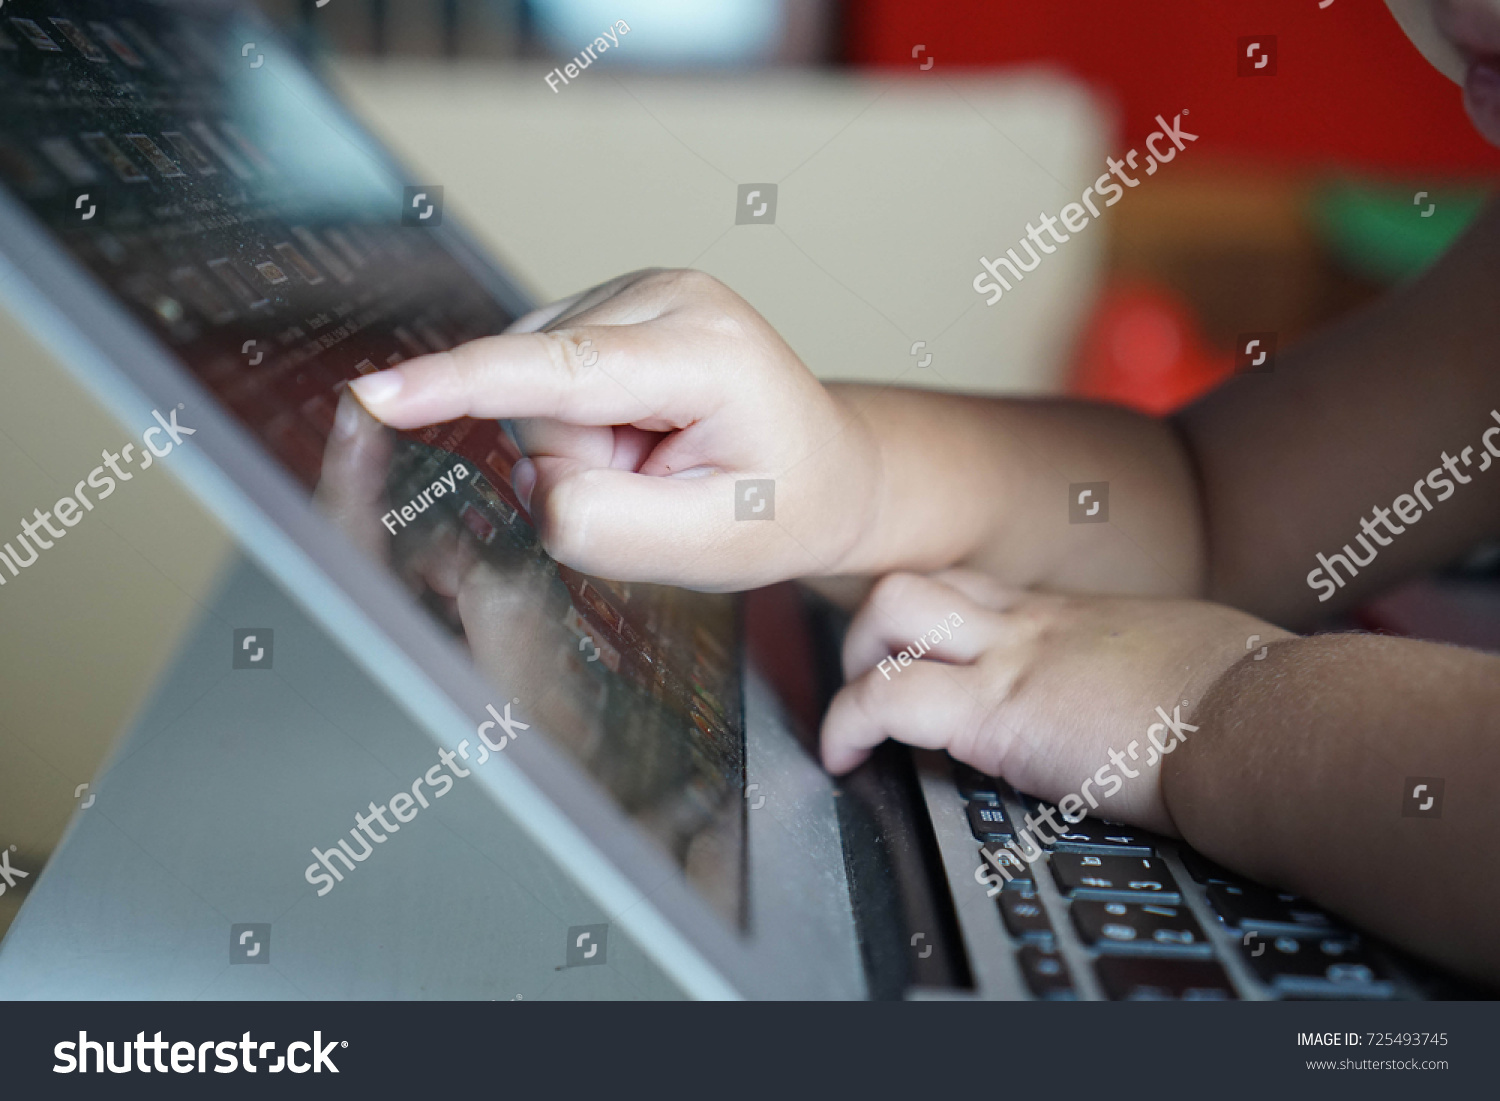 Baby asian toddler girl working on computer, notebook, laptop and point to screen monitor #725493745